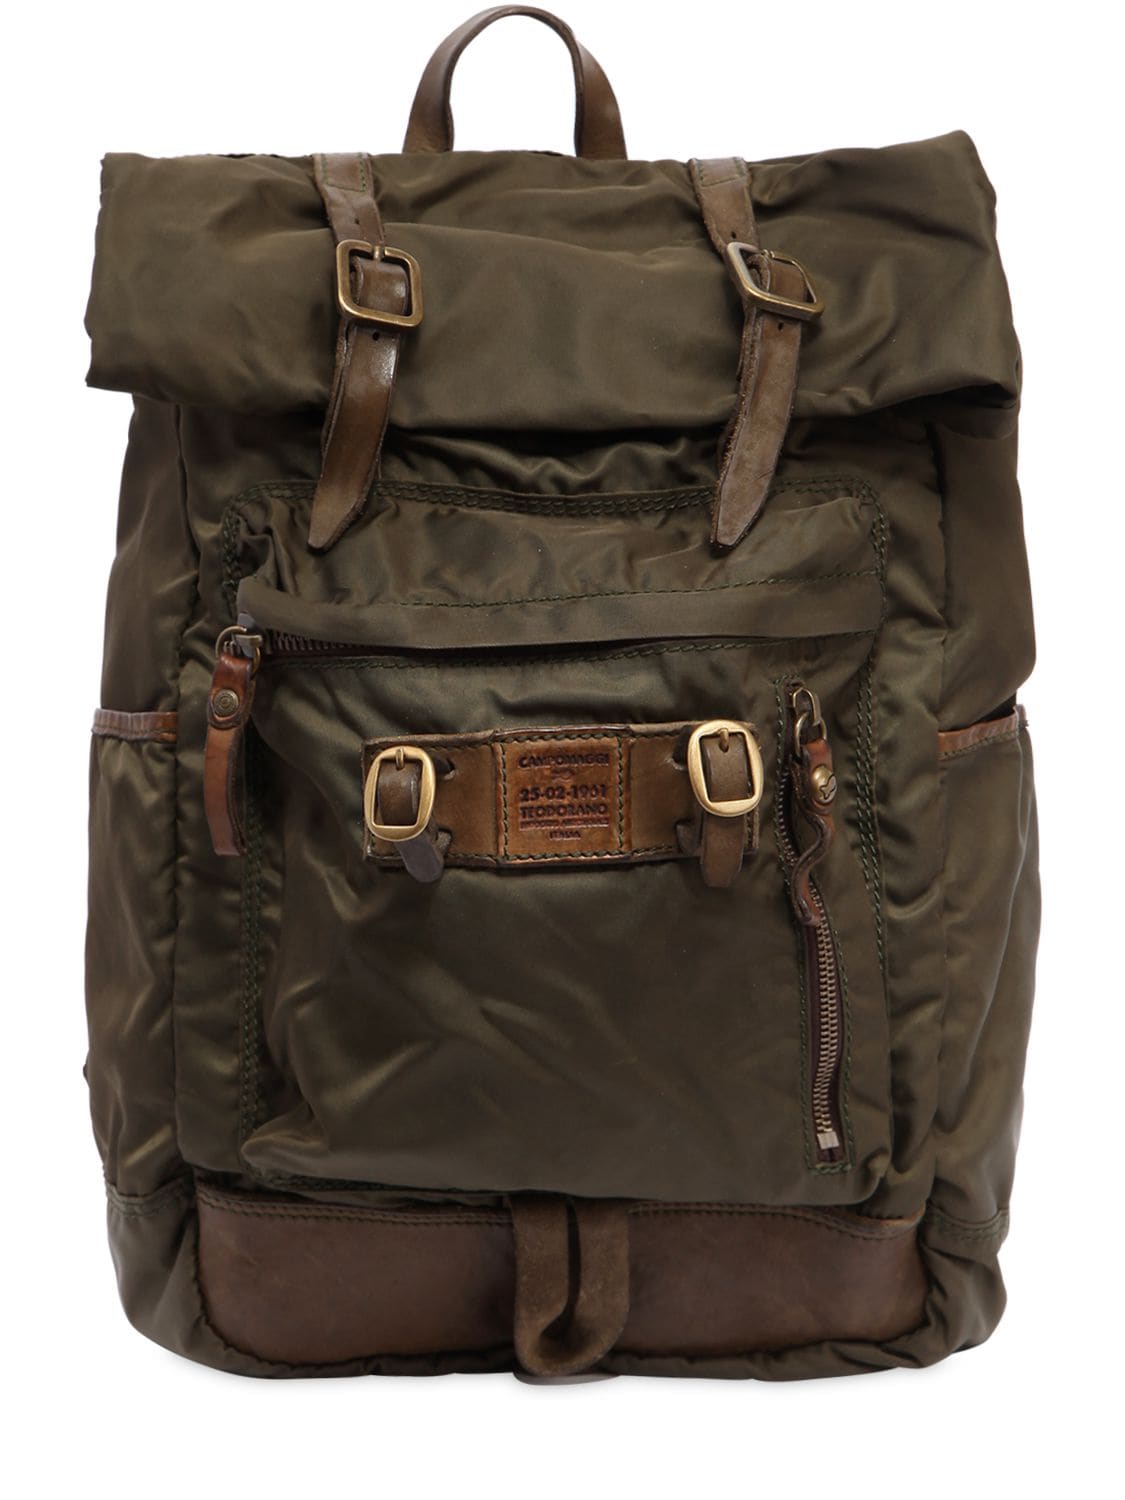 Campomaggi Nylon & Leather Backpack In Green